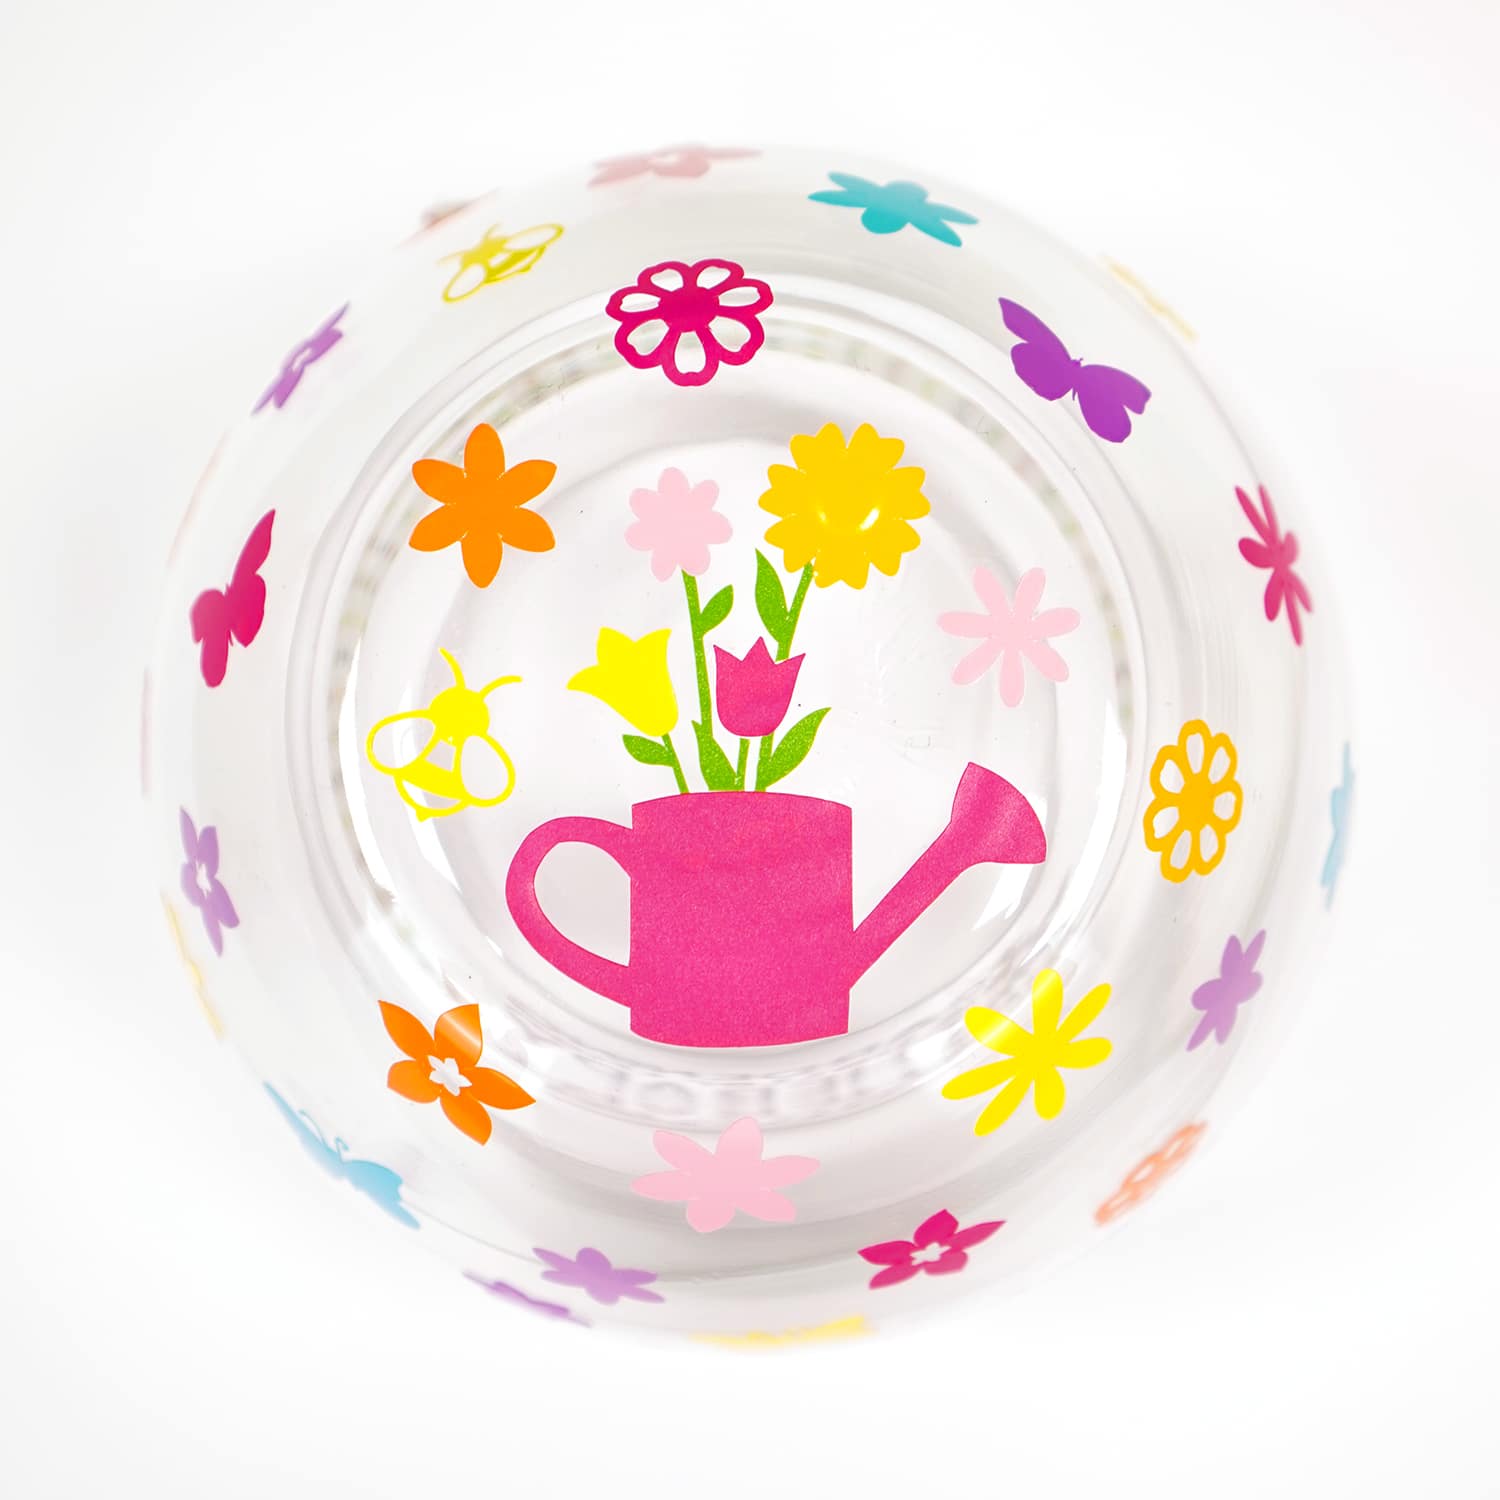 Inside of garden themed wine glass - watering can and floral decals on white background